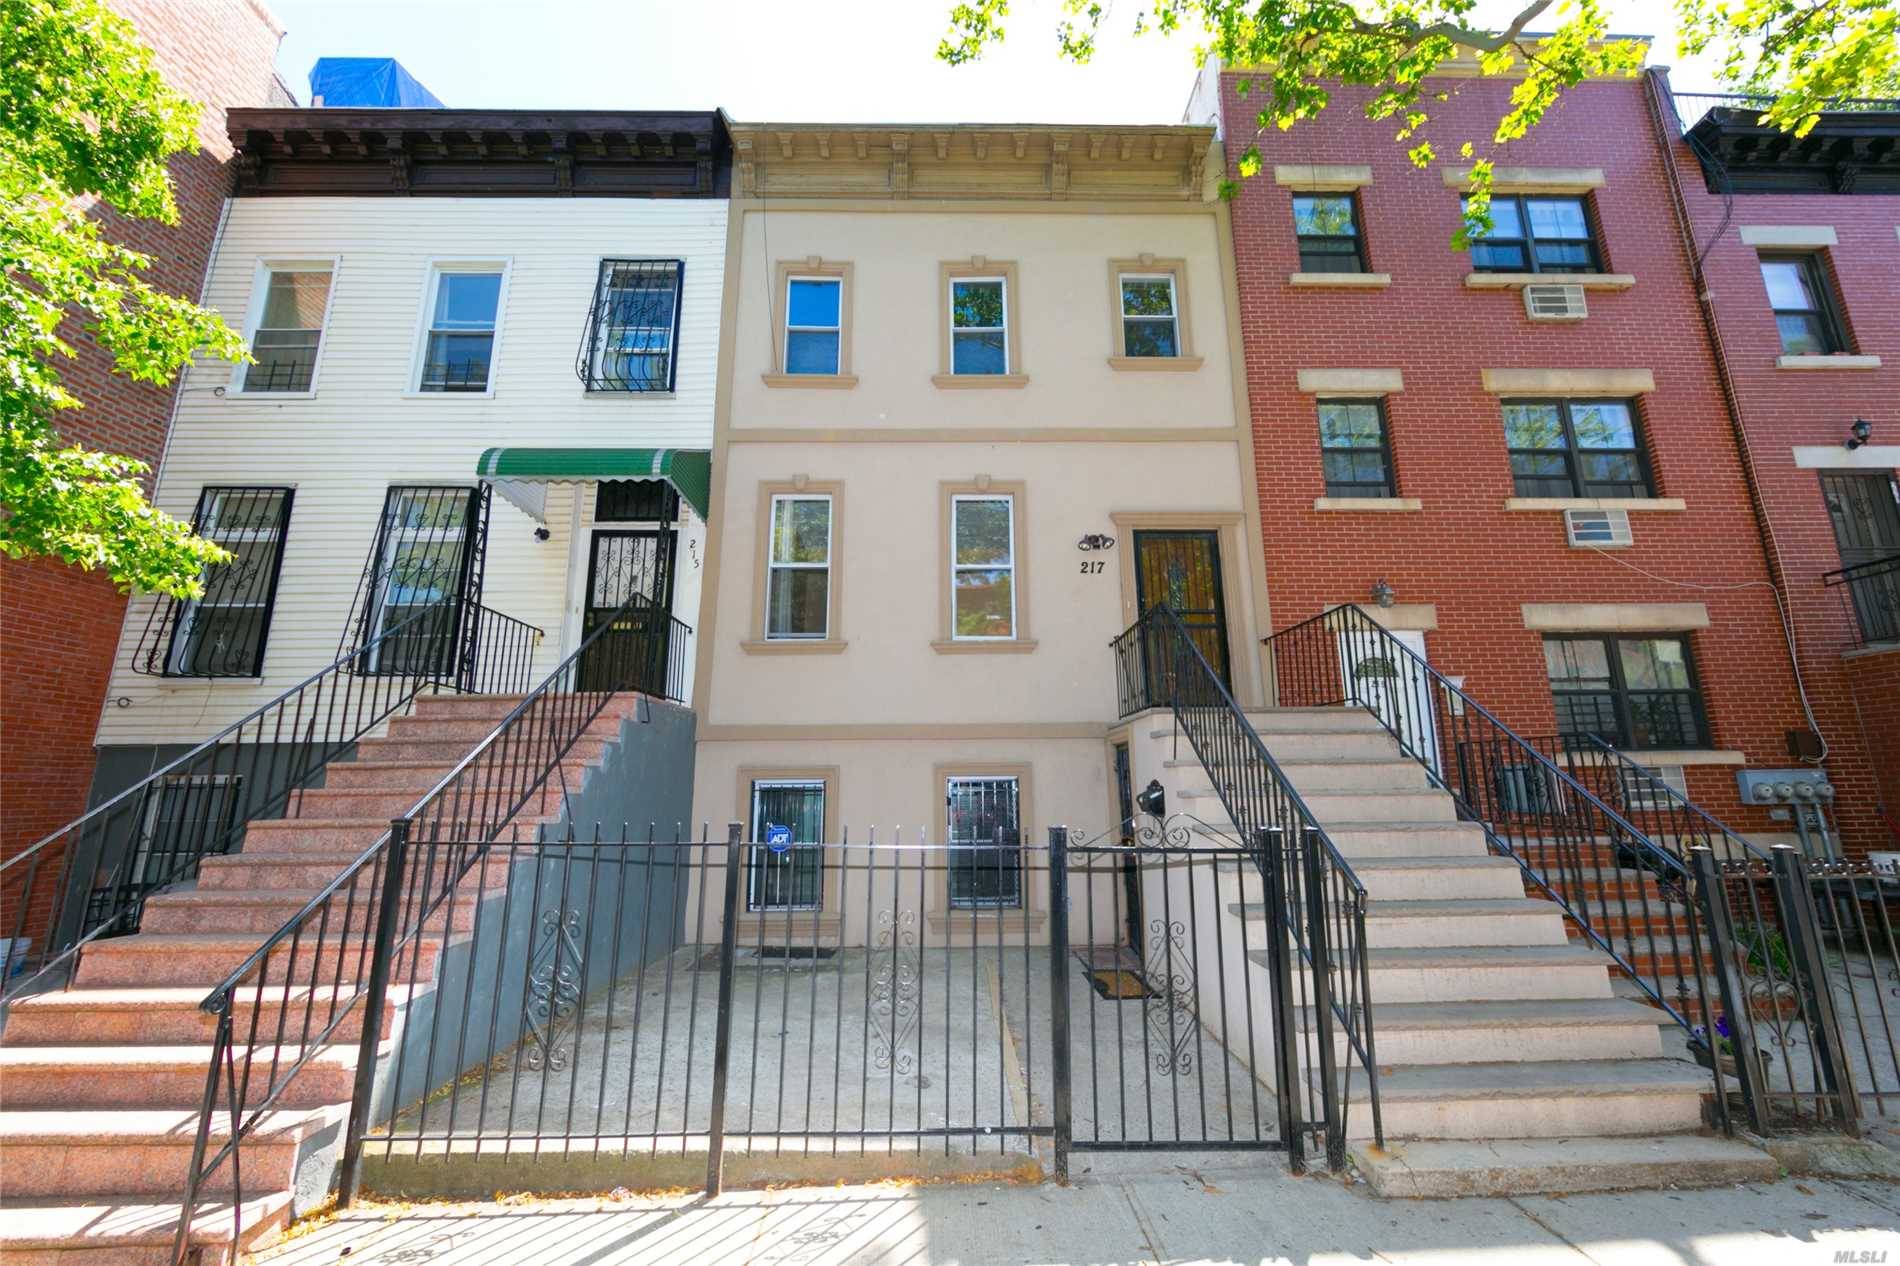 Rare Three Bedroom With Spacious Office/ Two Bath Duplex Apartment With Access To Private Yard Has Just Arrived To The Stuyvesant Heights Market!